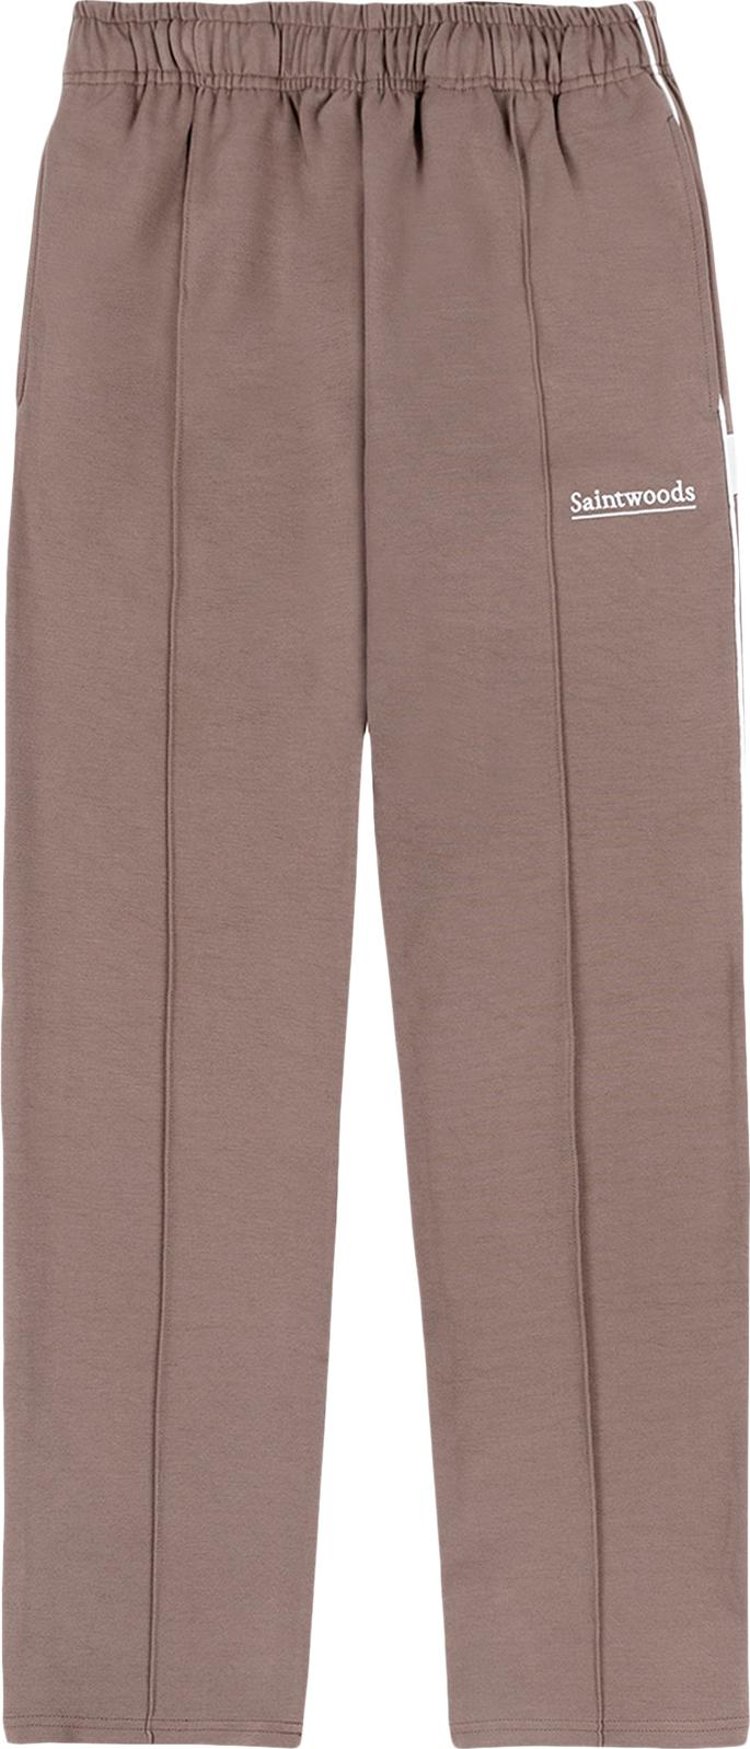 Saintwoods Track Pants 'Dusty Taupe'